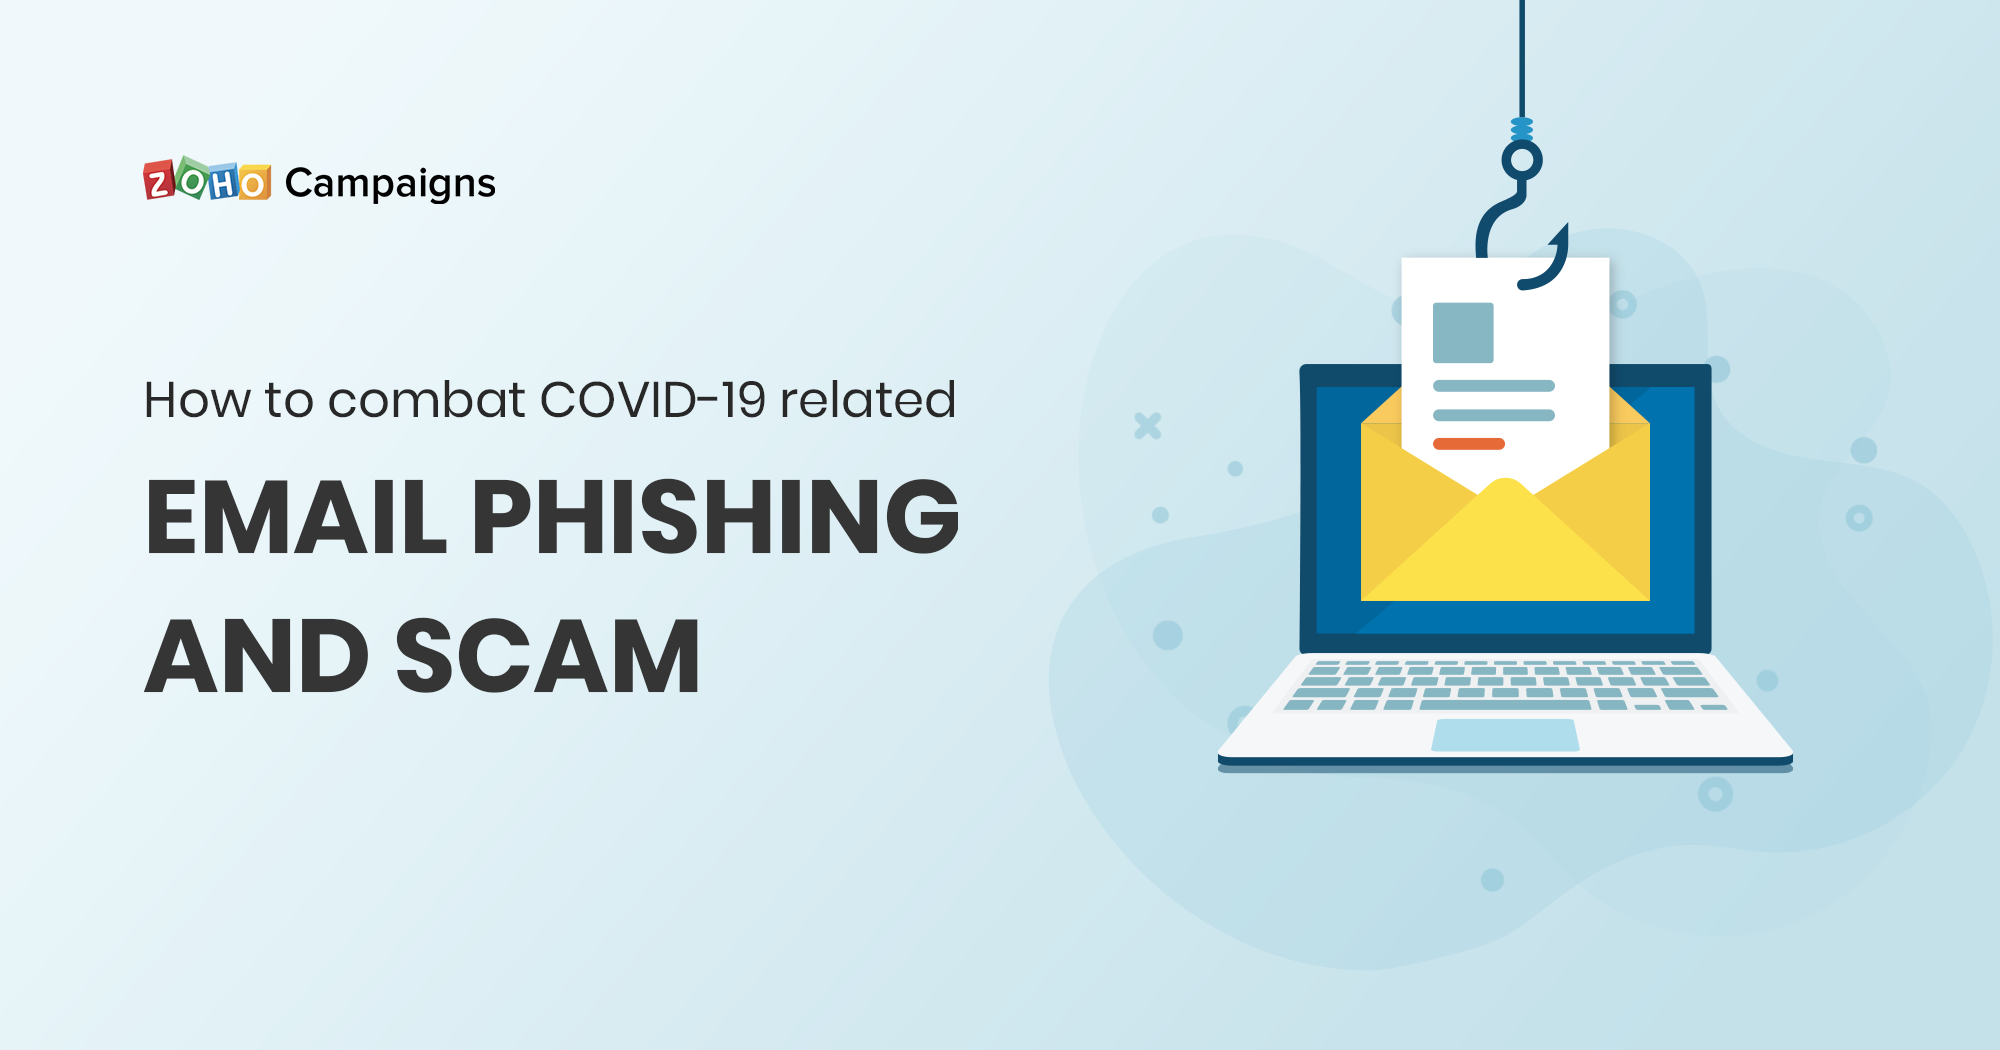 COVID-19 email phishing and scam